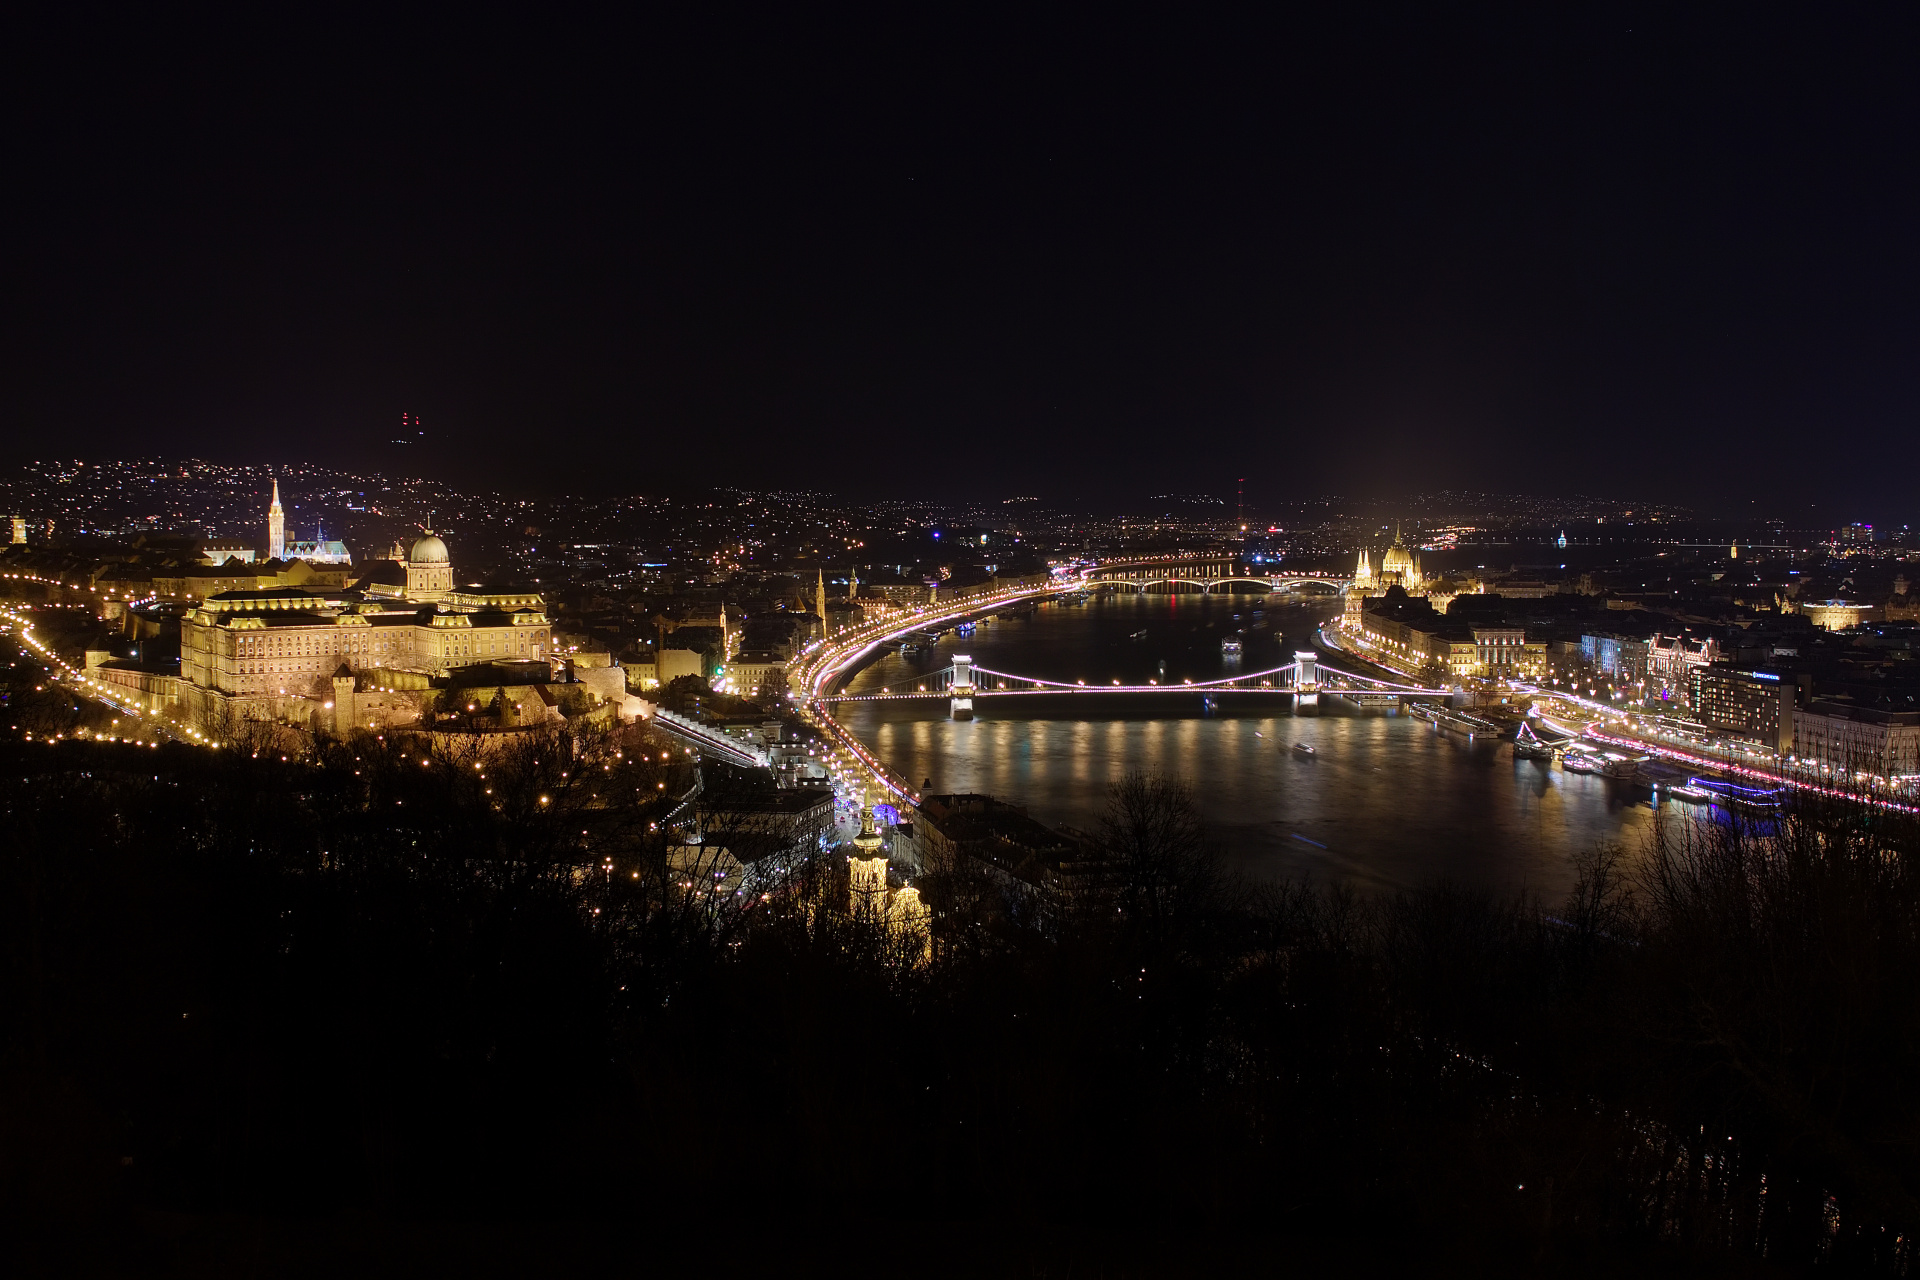 Buda and Chain Bridge from Gellért Hill (Travels » Budapest » Budapest at Night)